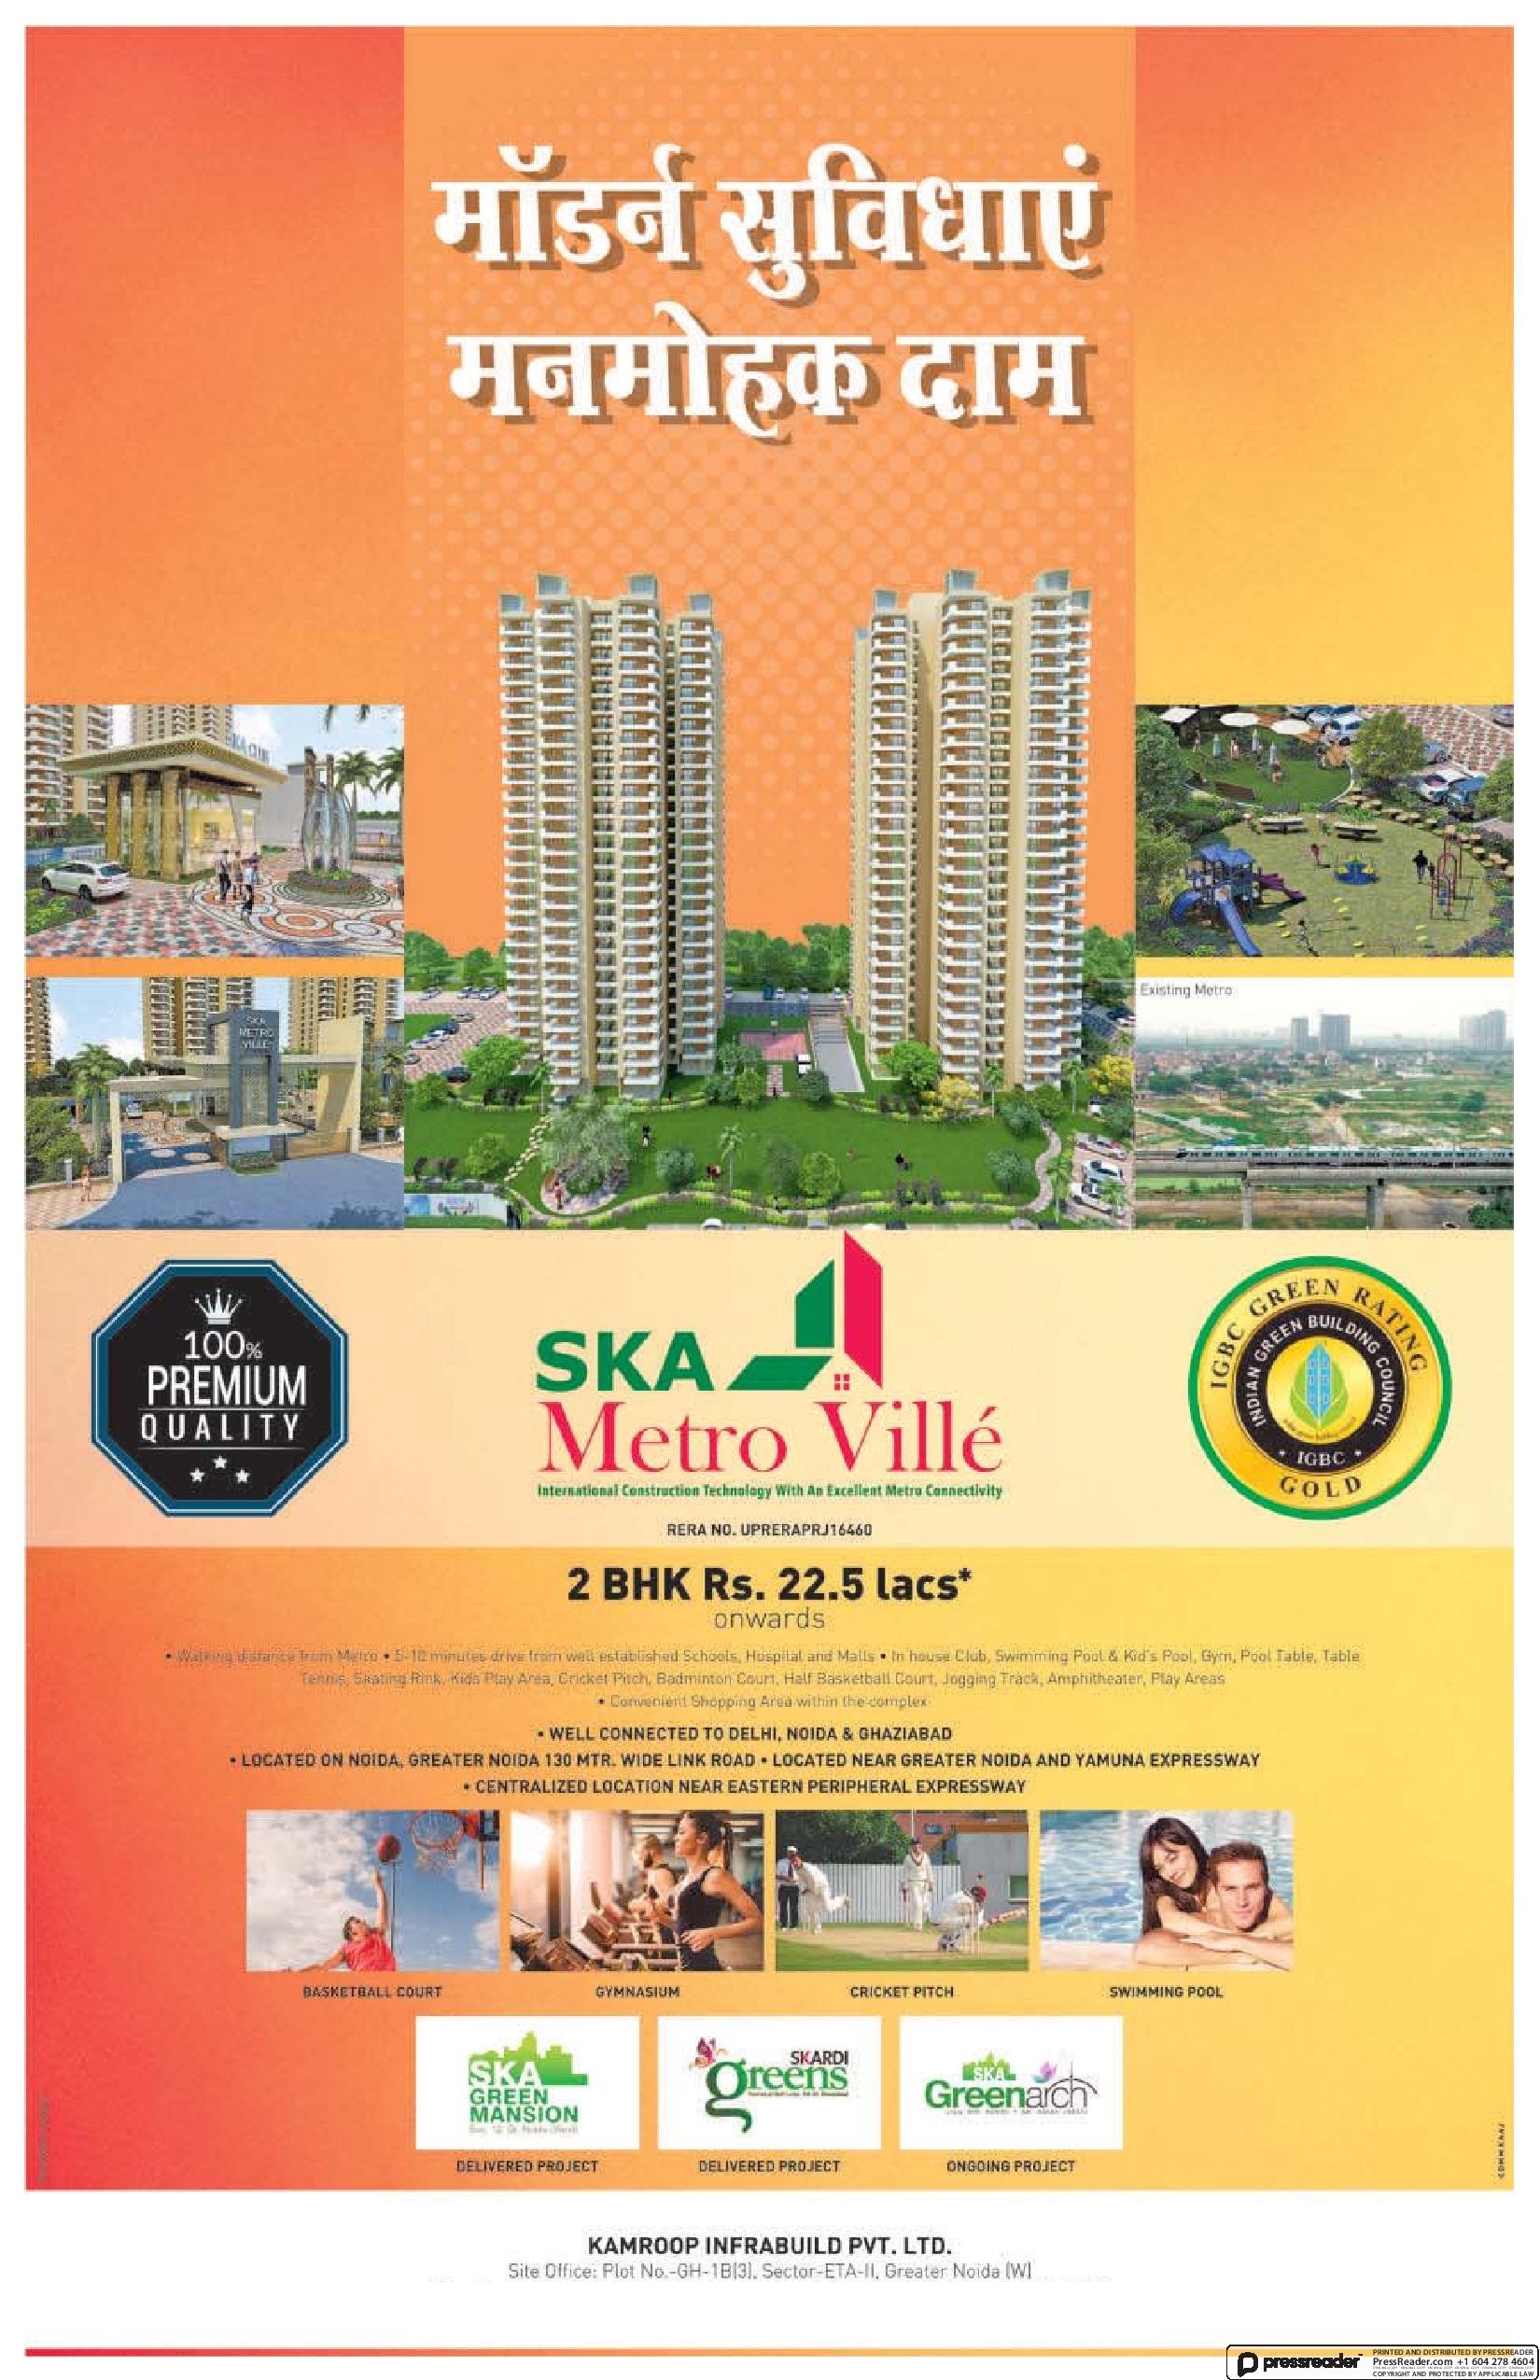 Book 2 BHK @ Rs. 22.5 Lacs at SKA Metro Ville in Greater Noida